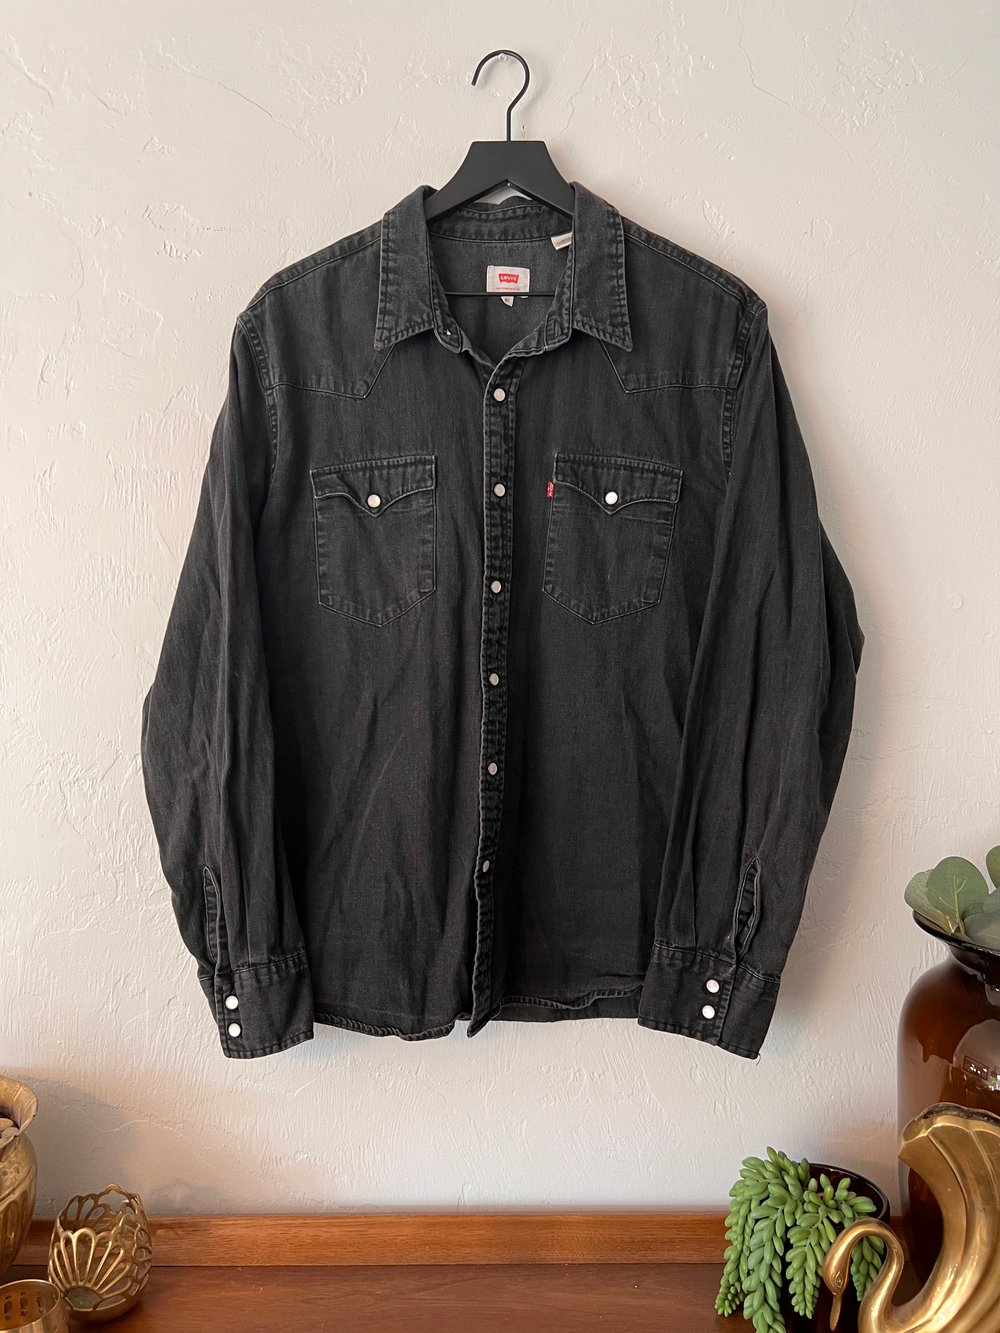 Levi’s Black Pearl Snap Button Up (XL)